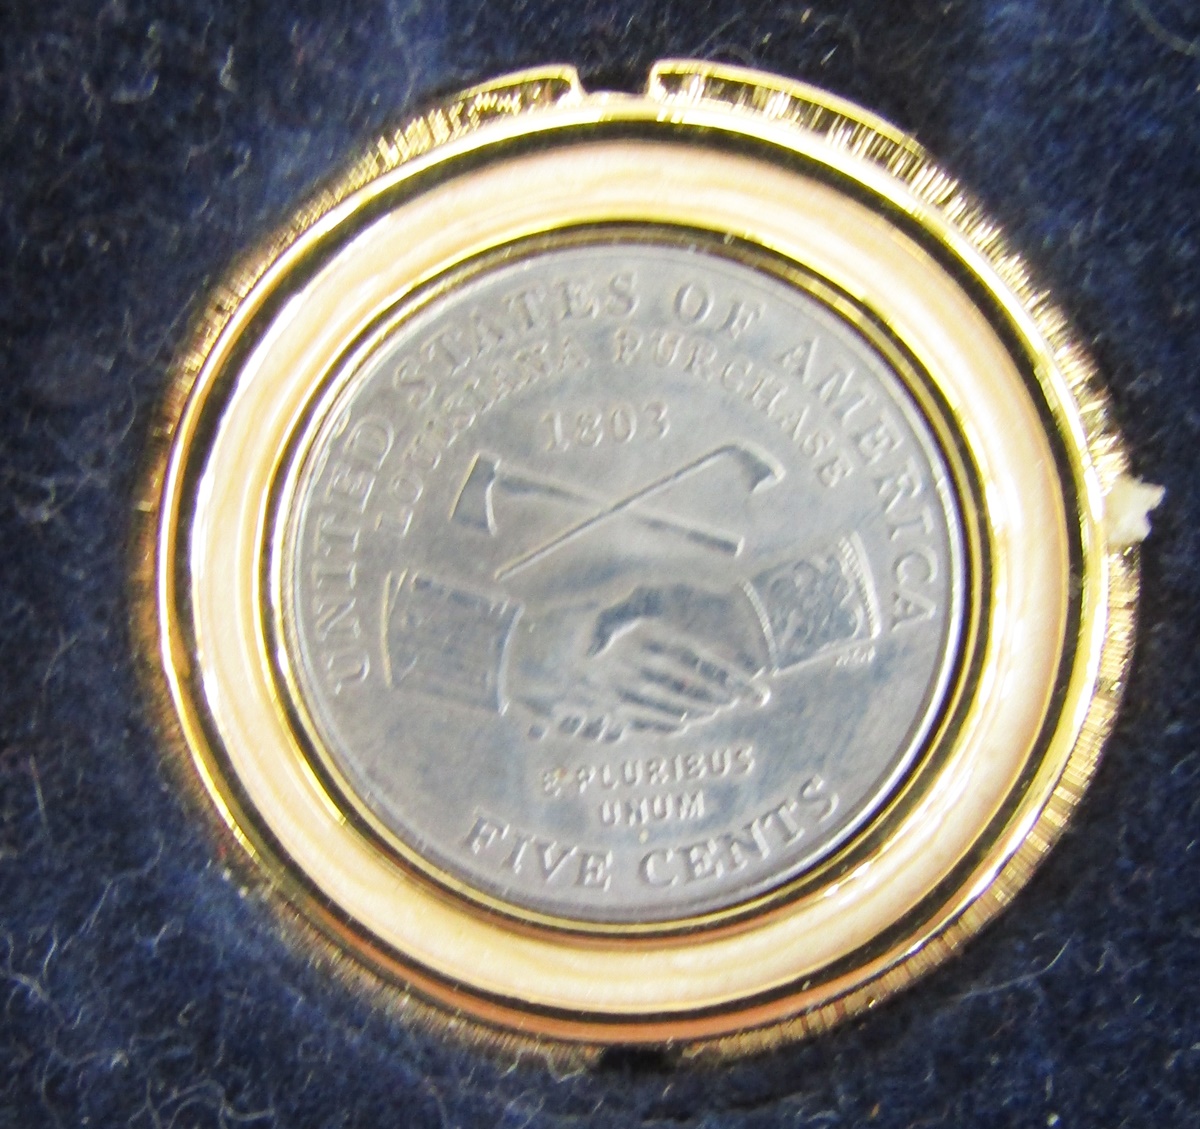 Eisenhower commemorative set made up of silver medallion and 6c postage stamp, and US numismatic - Image 8 of 9